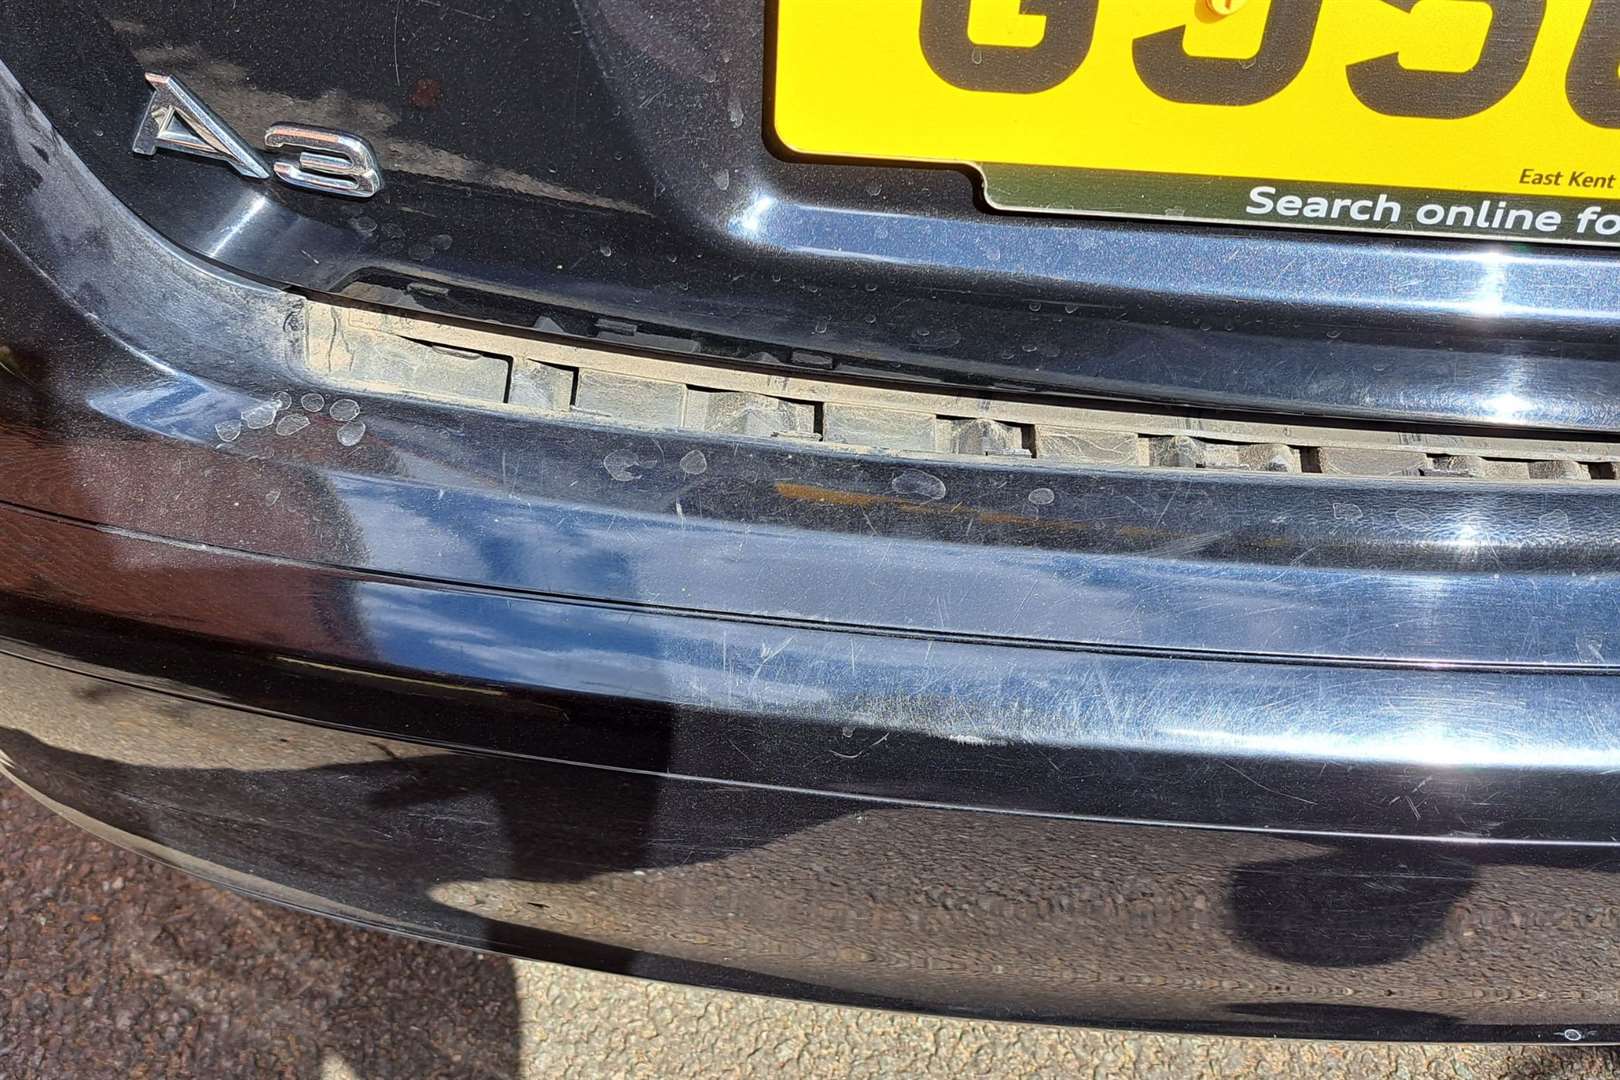 Damage to the rear of the Audi S3